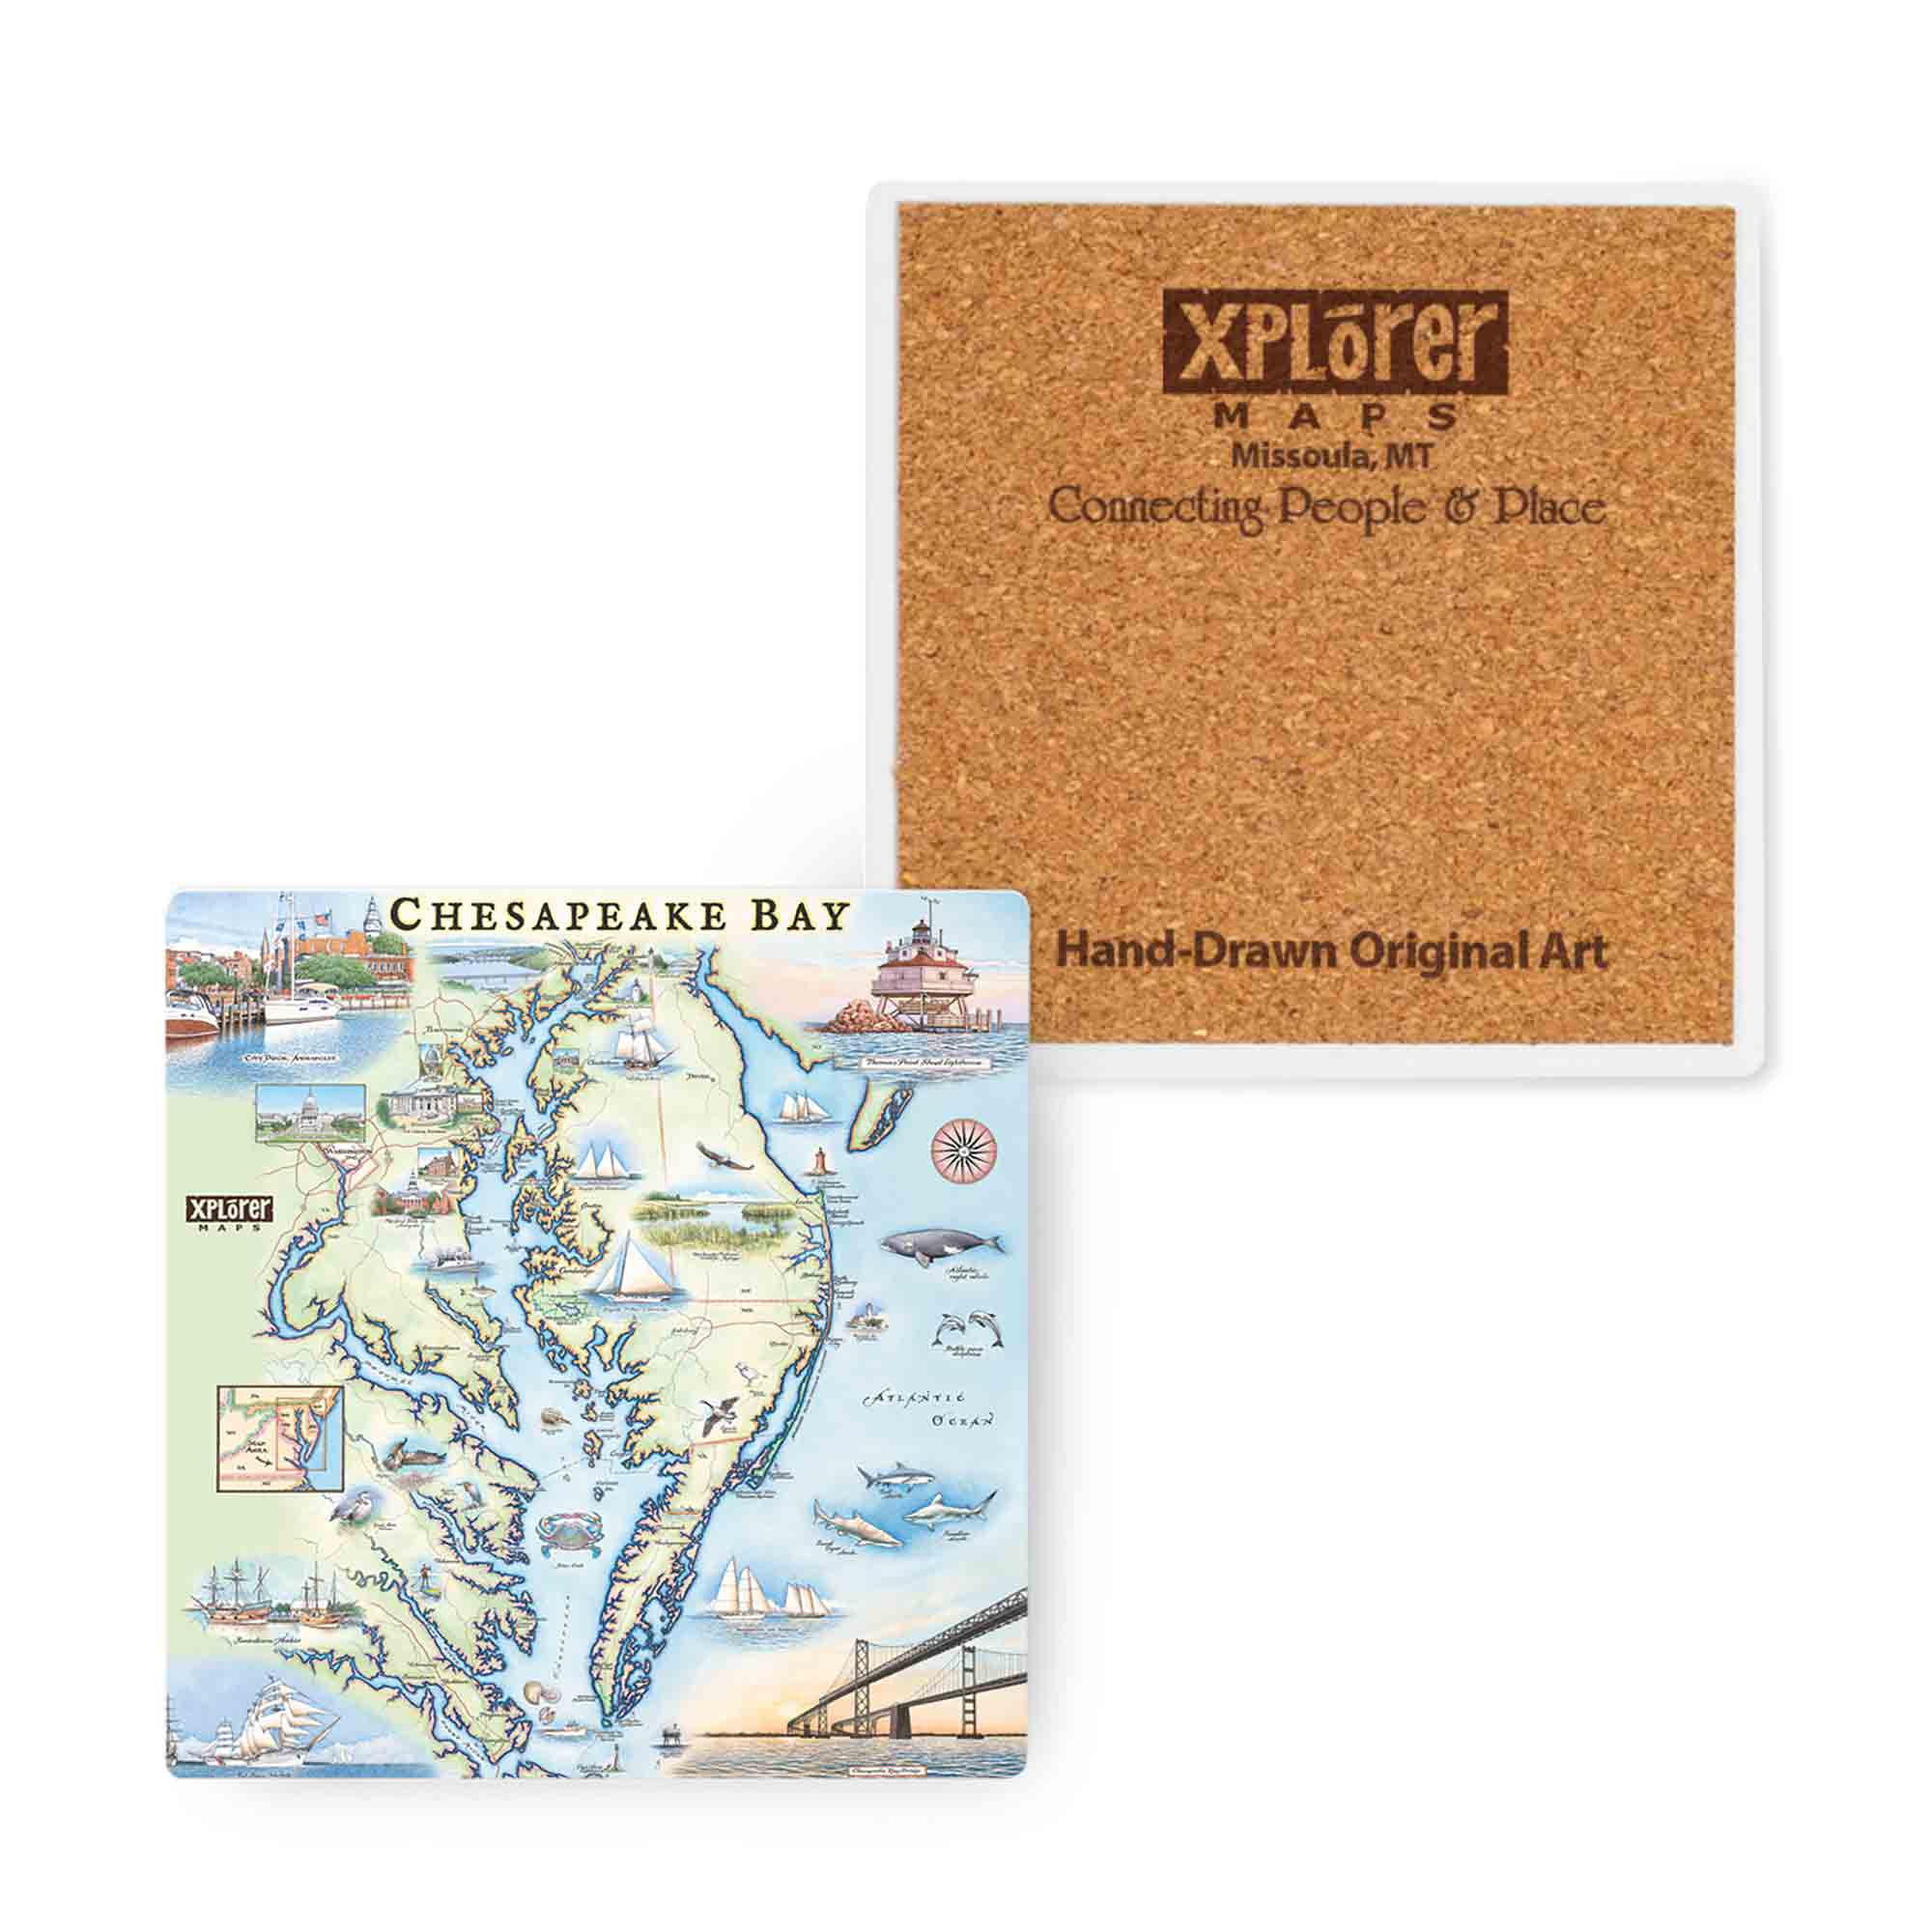 Chesapeake Bay Map Ceramic Coasters featuring illustrations of boat craft and marine life. Places on the map include Baltimore, Annapolis, Cambridge, Yorktown, and the Chesapeake Bay Bridge. The coaster measures 4